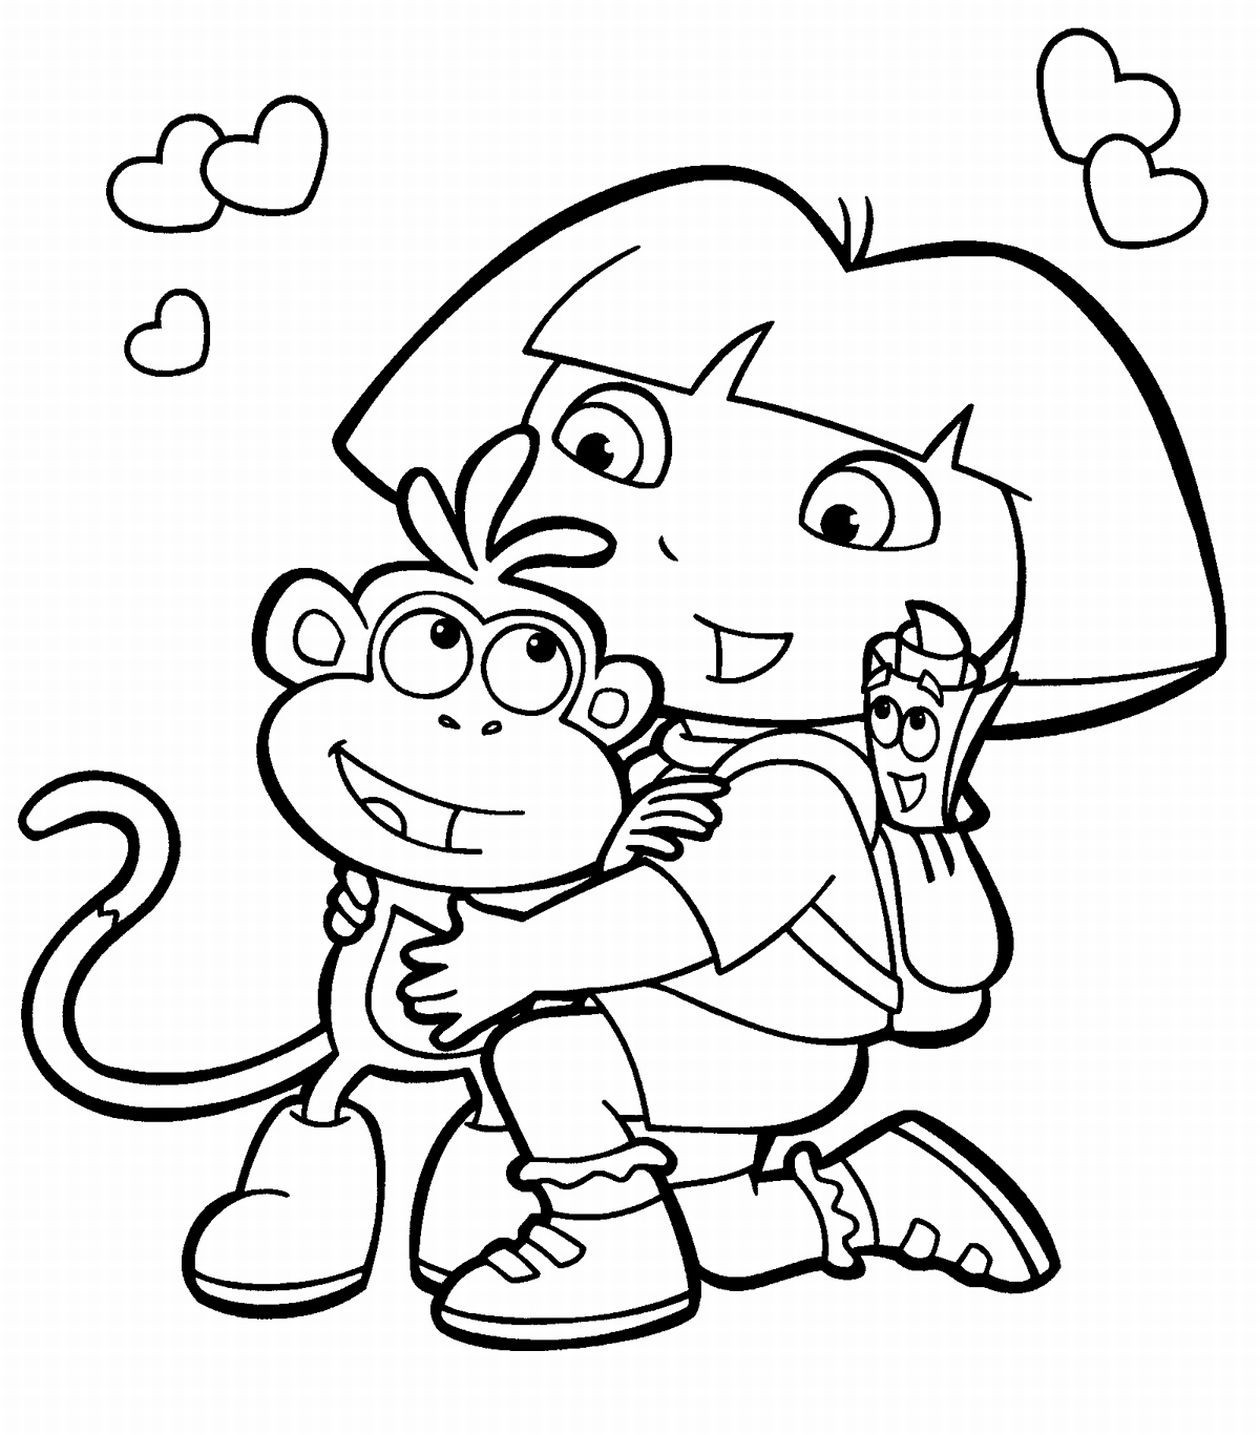 Kids Coloring Pages Free
 free printable coloring pages for kids